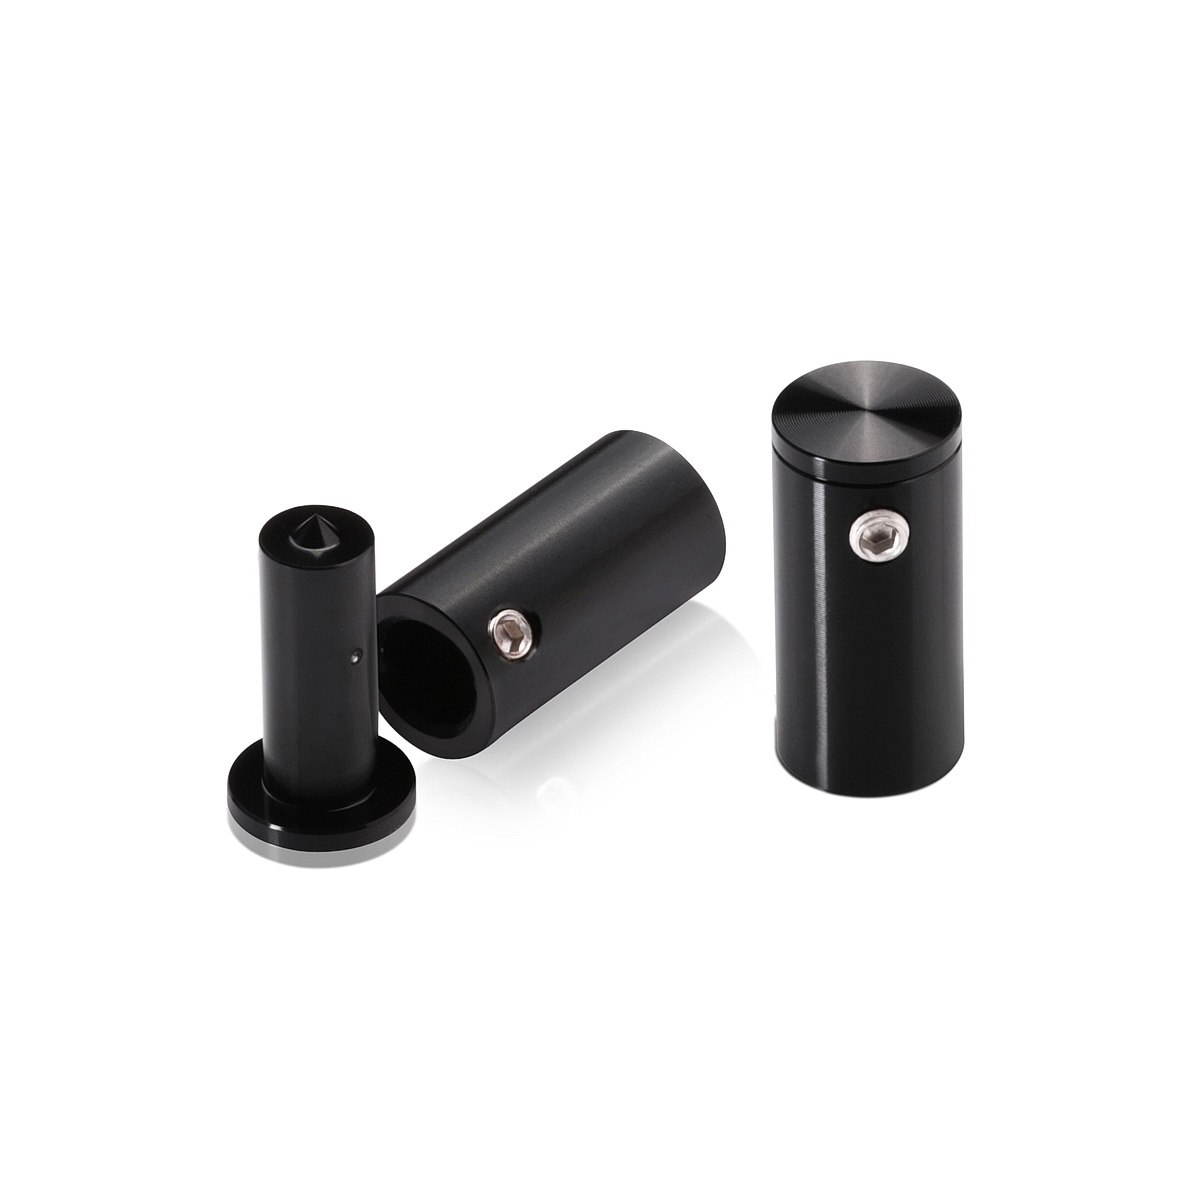 1/2'' Diameter x 1'' Barrel Length, Aluminum Glass Standoff Black Anodized Finish (Indoor or Outdoor Use) [Required Material Hole Size: 5/16'']